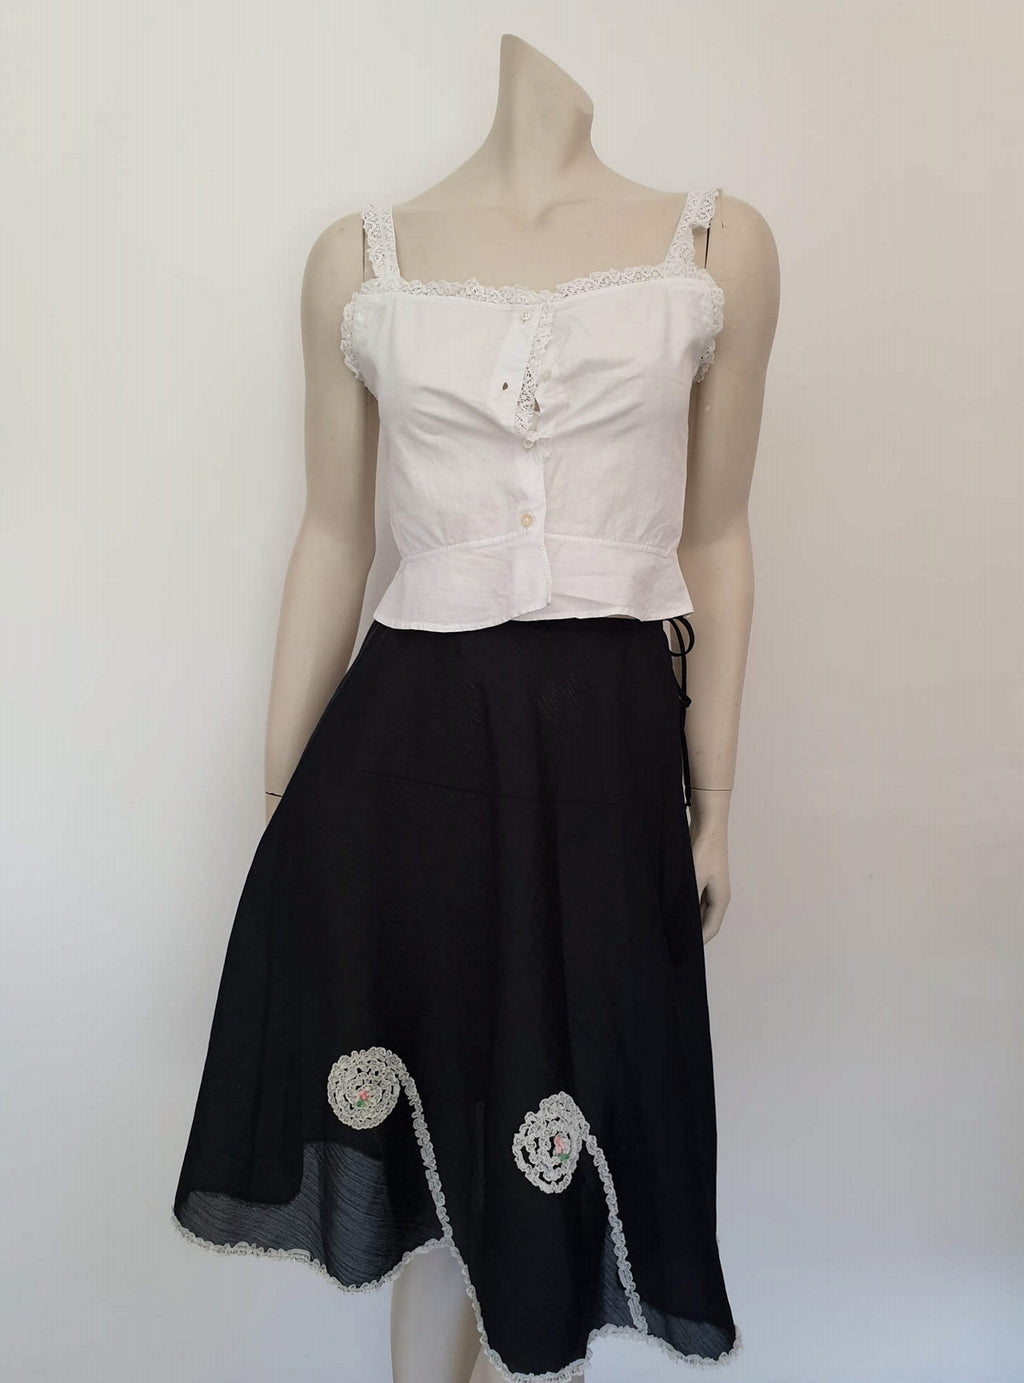 1960s vintage black half petticoat skirt with lace